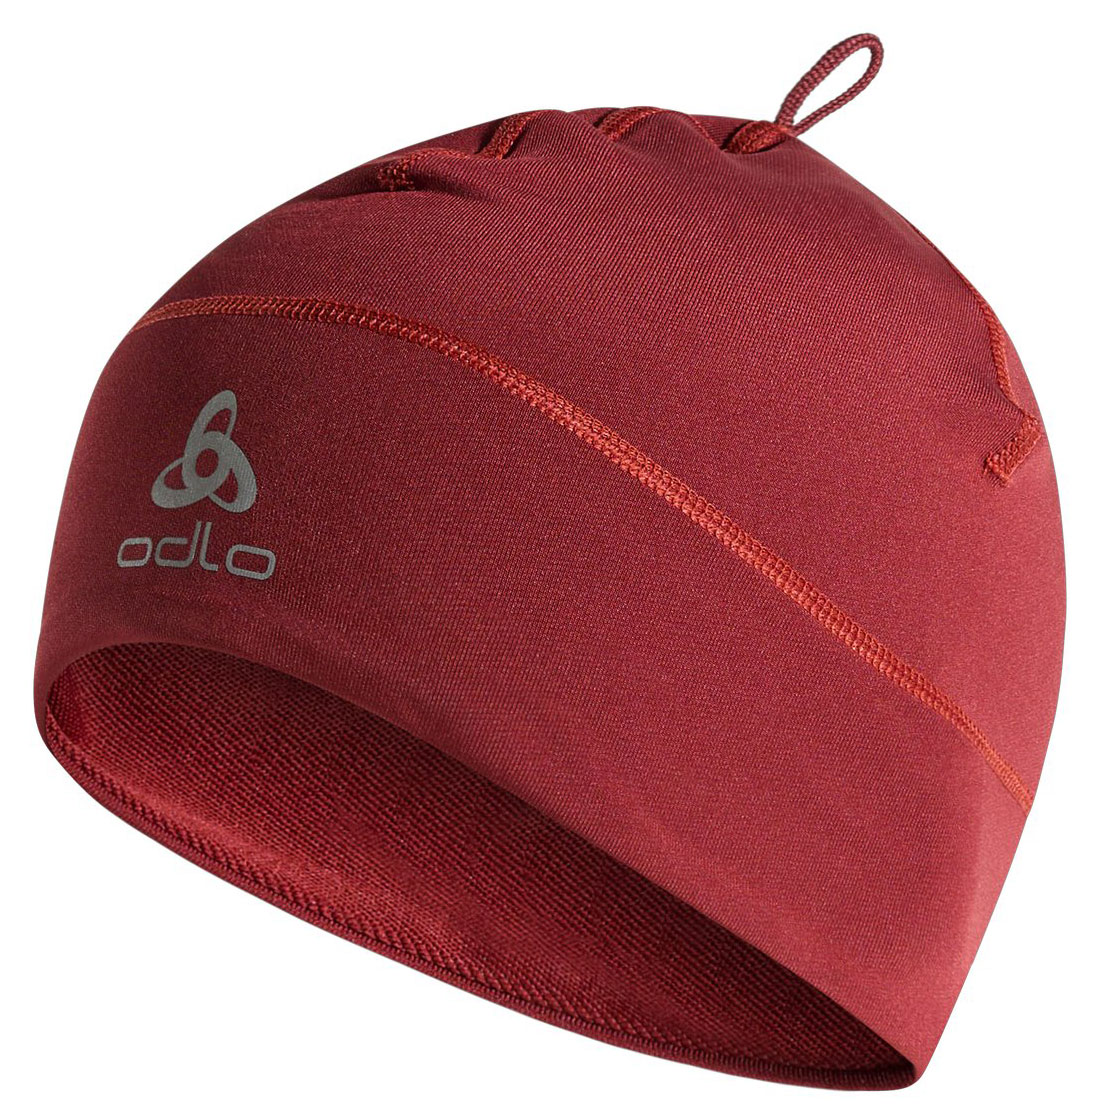 Picture of Odlo Polyknit Warm ECO Hat - spiced apple